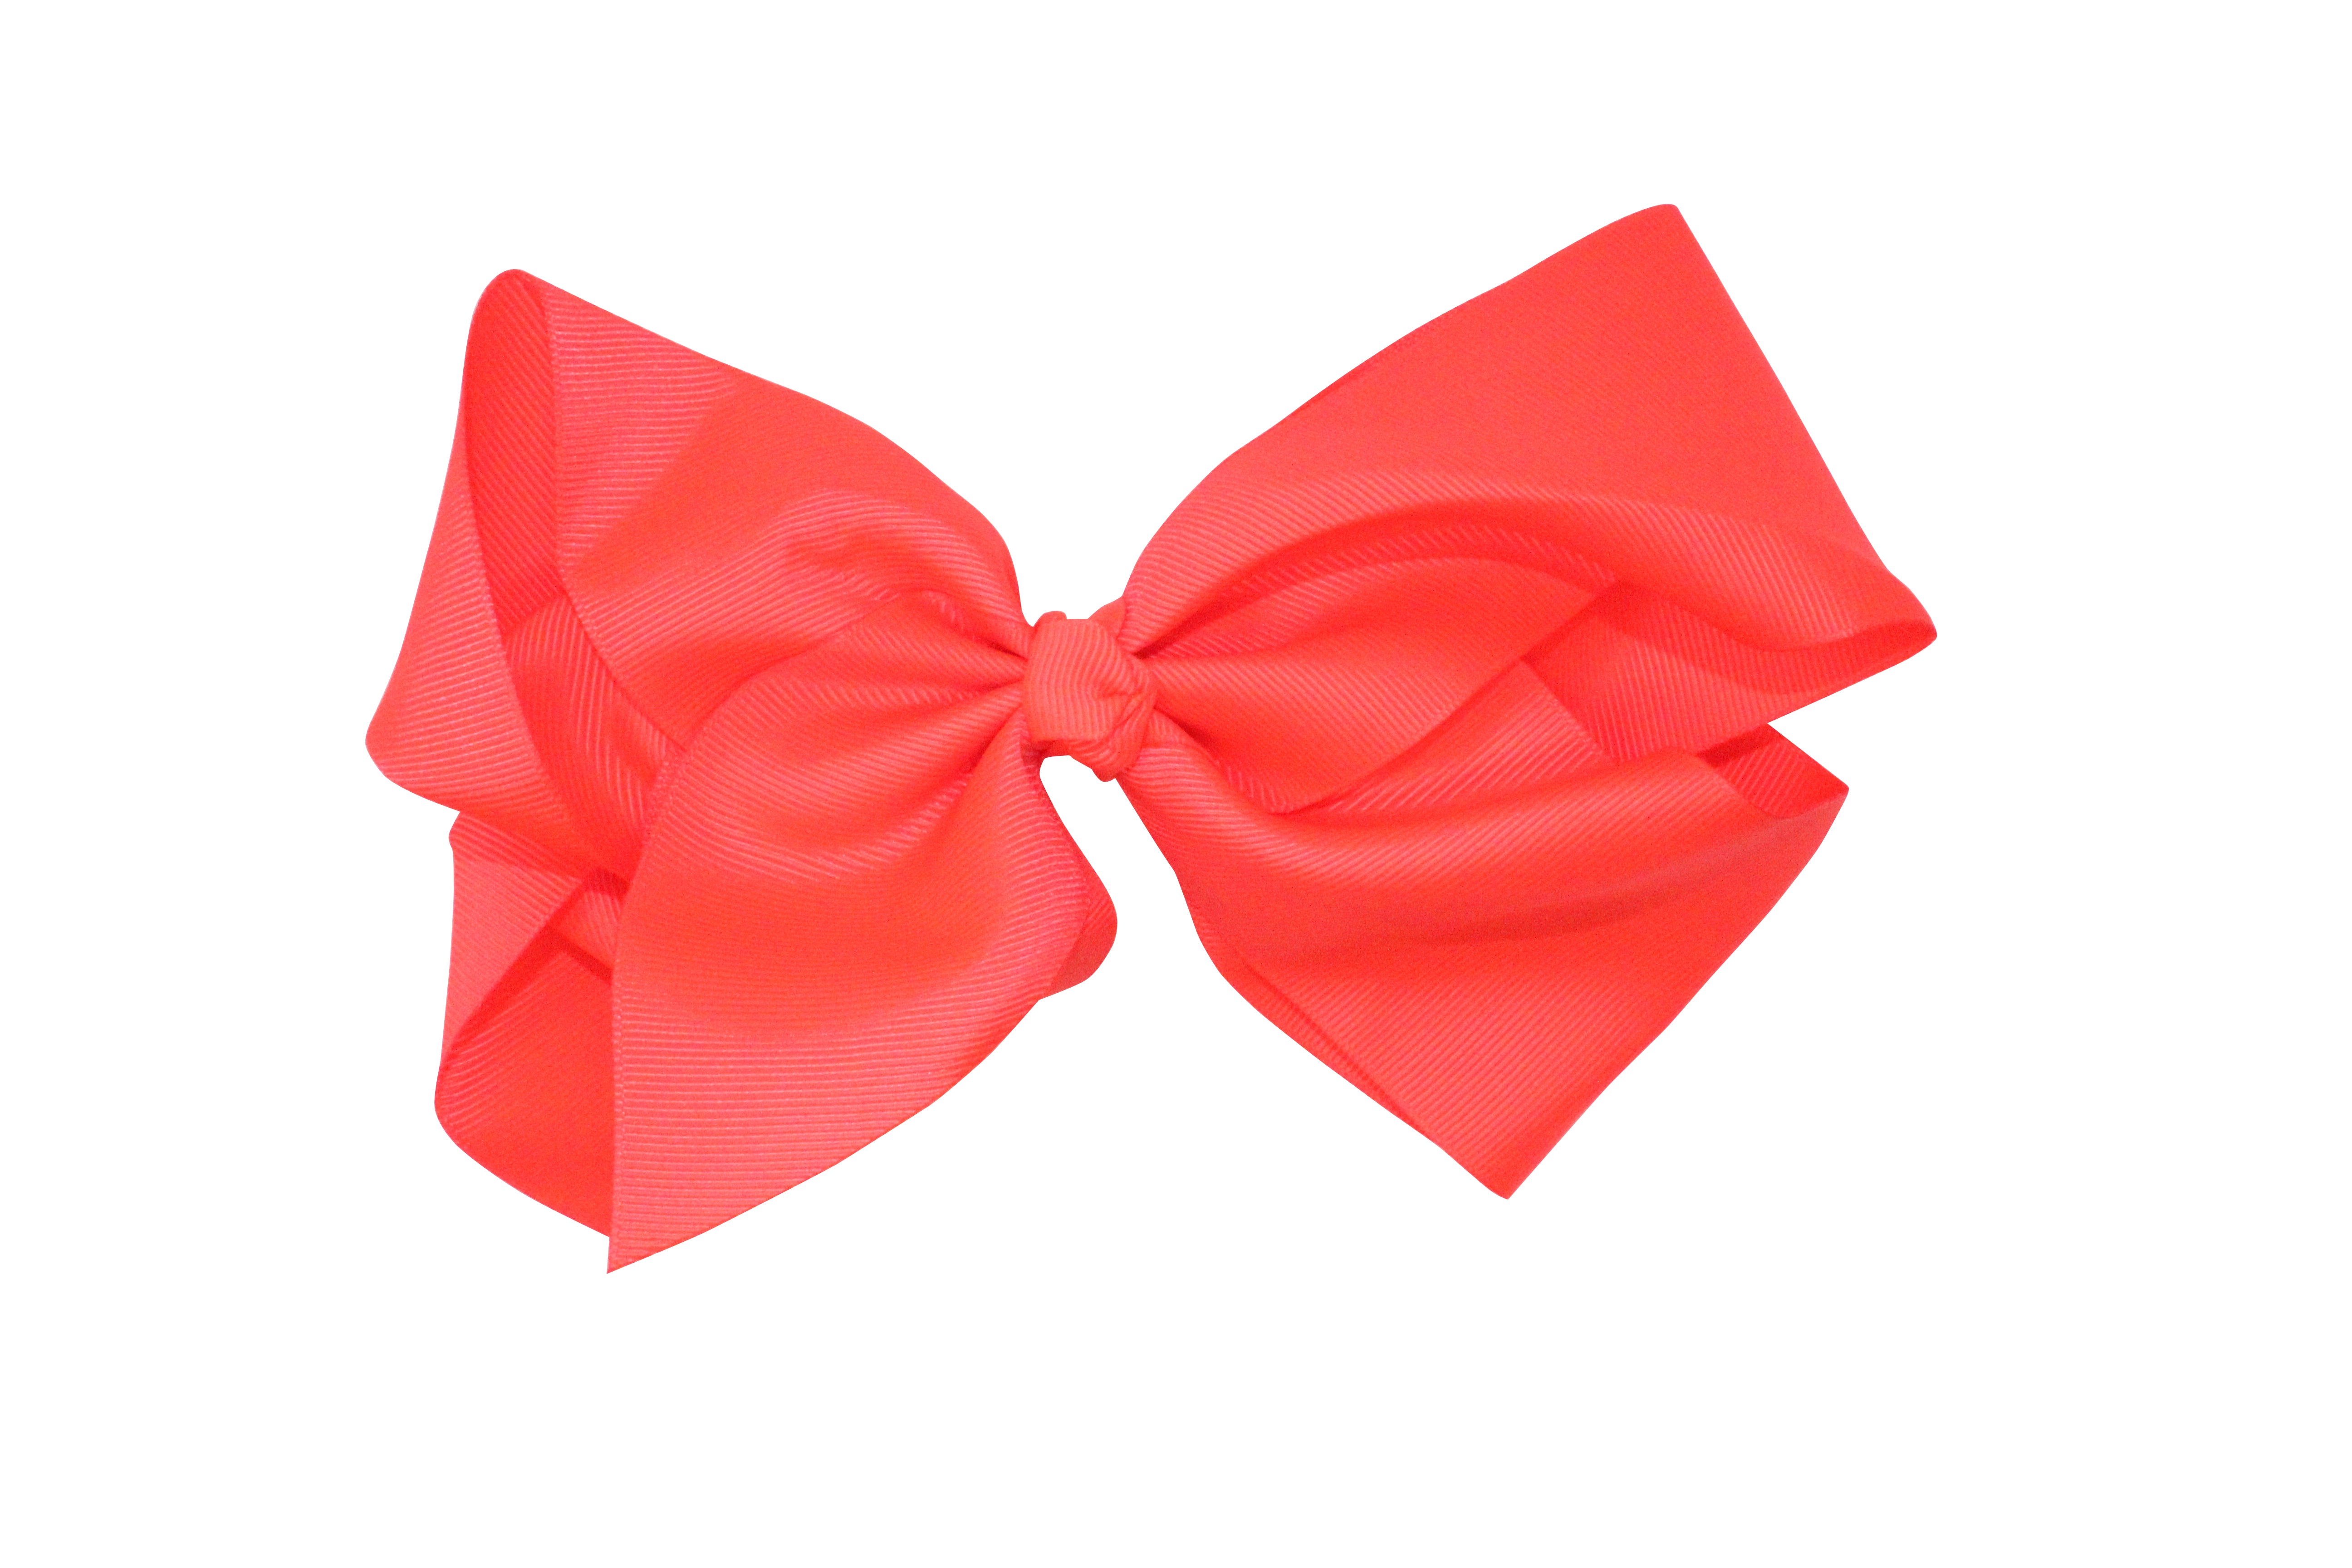 Large Jumbo Neon Colored Grosgrain Ribbon Bow Tie Hair Clip - Neon Nation